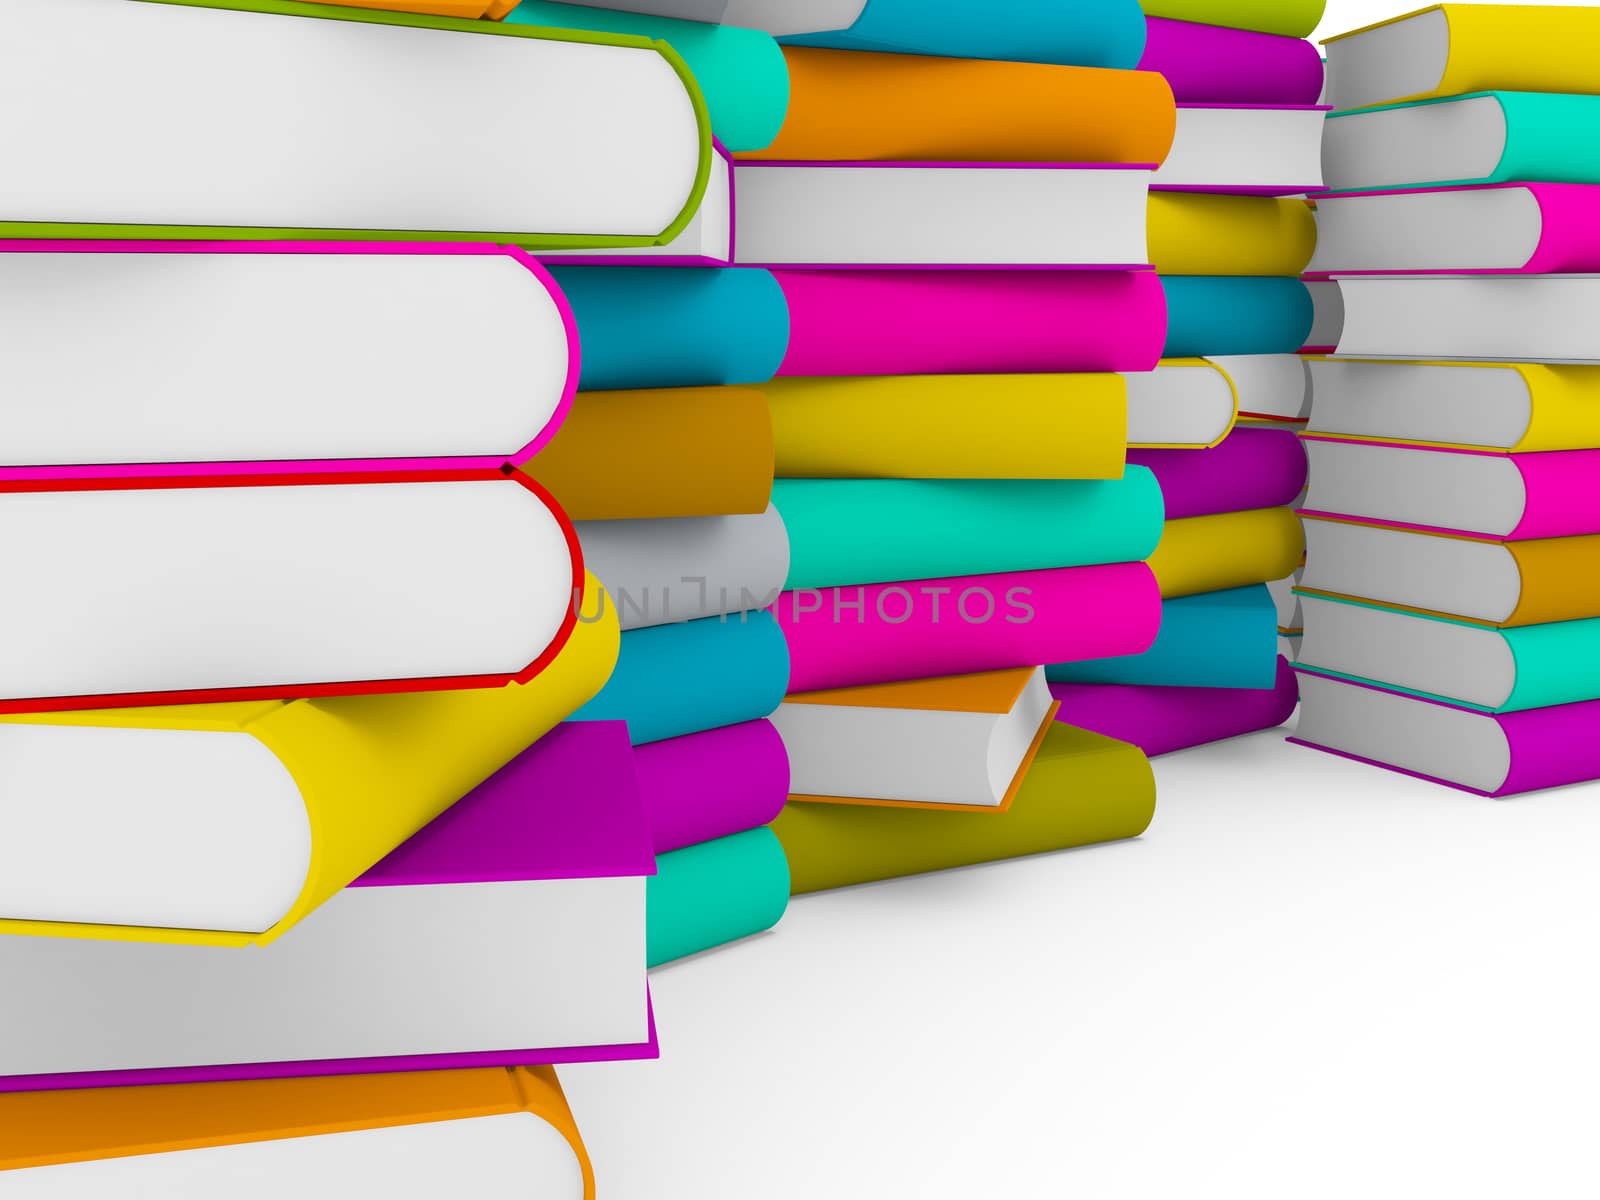 multiple stack of colorful books on white background, partial view